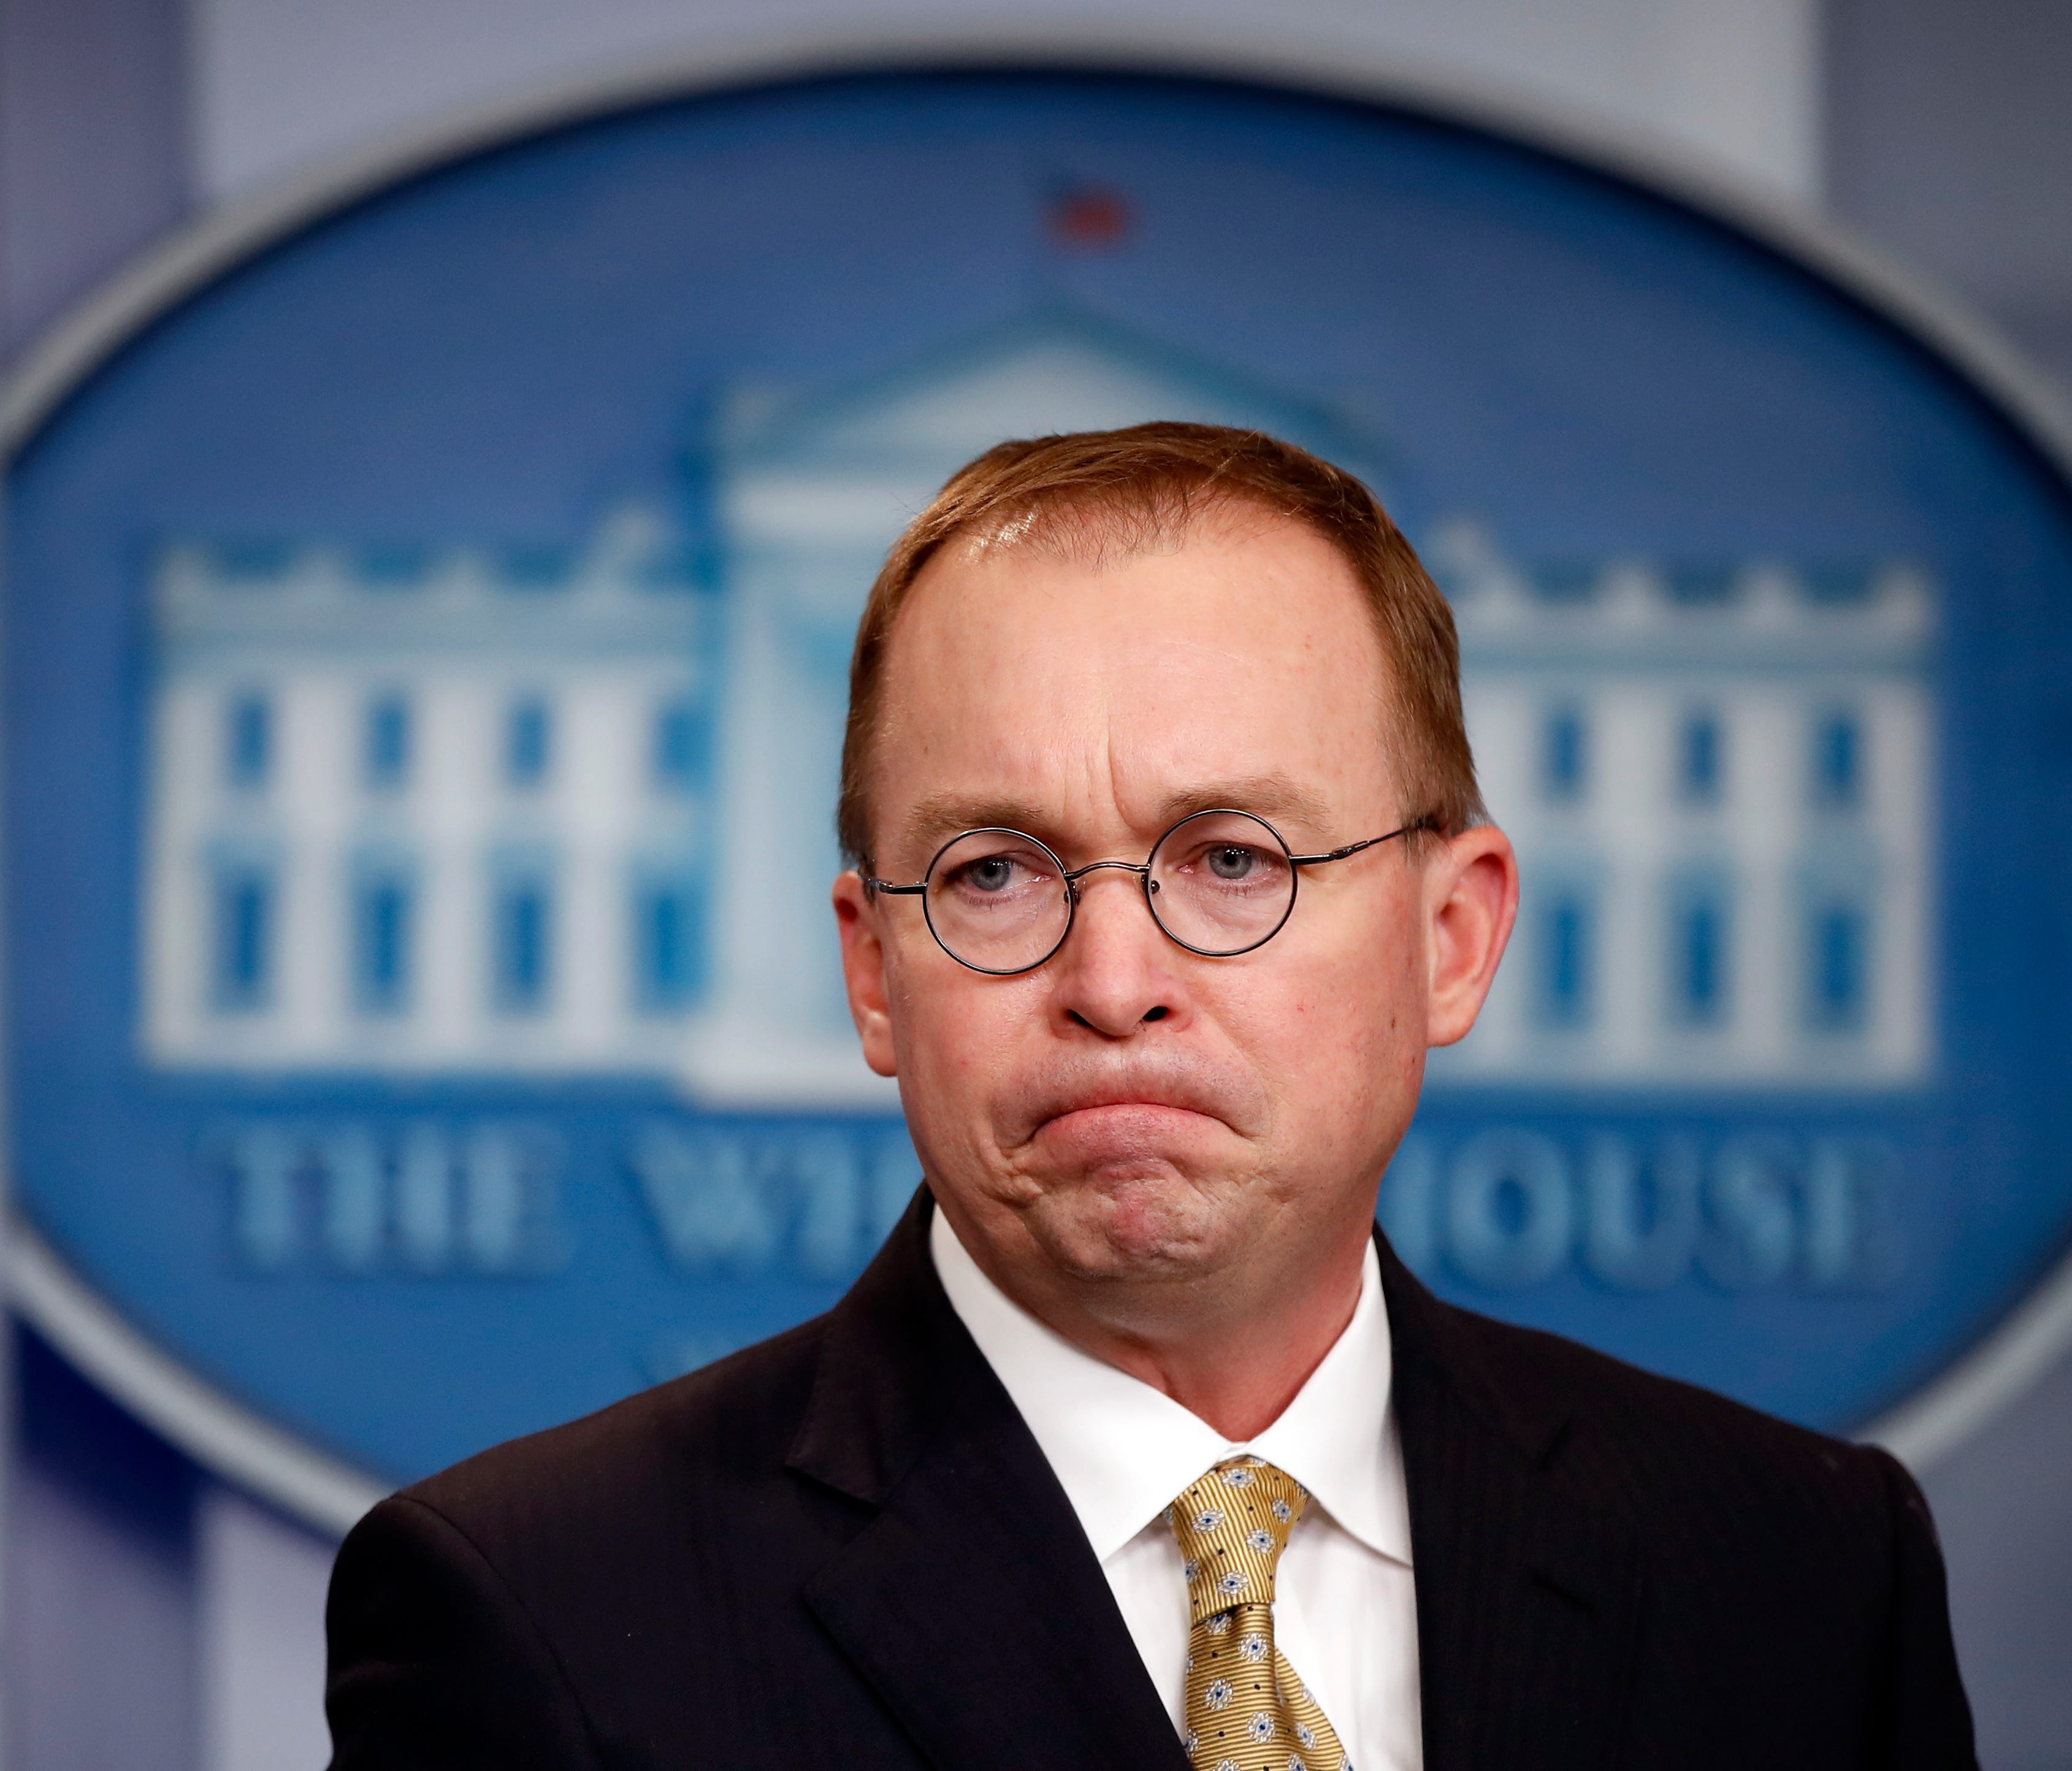 White House budget director Mick Mulvaney listens to a question during a press briefing at the White House Jan. 20.